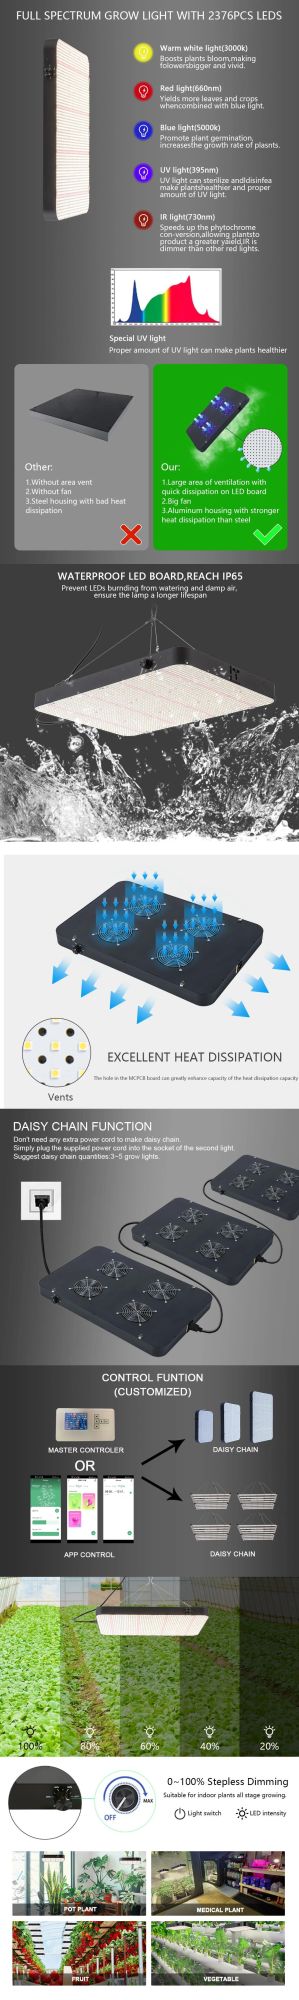 <Quick Delivery><in Us Stock>Wholesale Full Spectrum Hydroponic Waterproof Daisy Chain Function 600W 0-100% Dimmable High Power Indoor Plants LED Grow